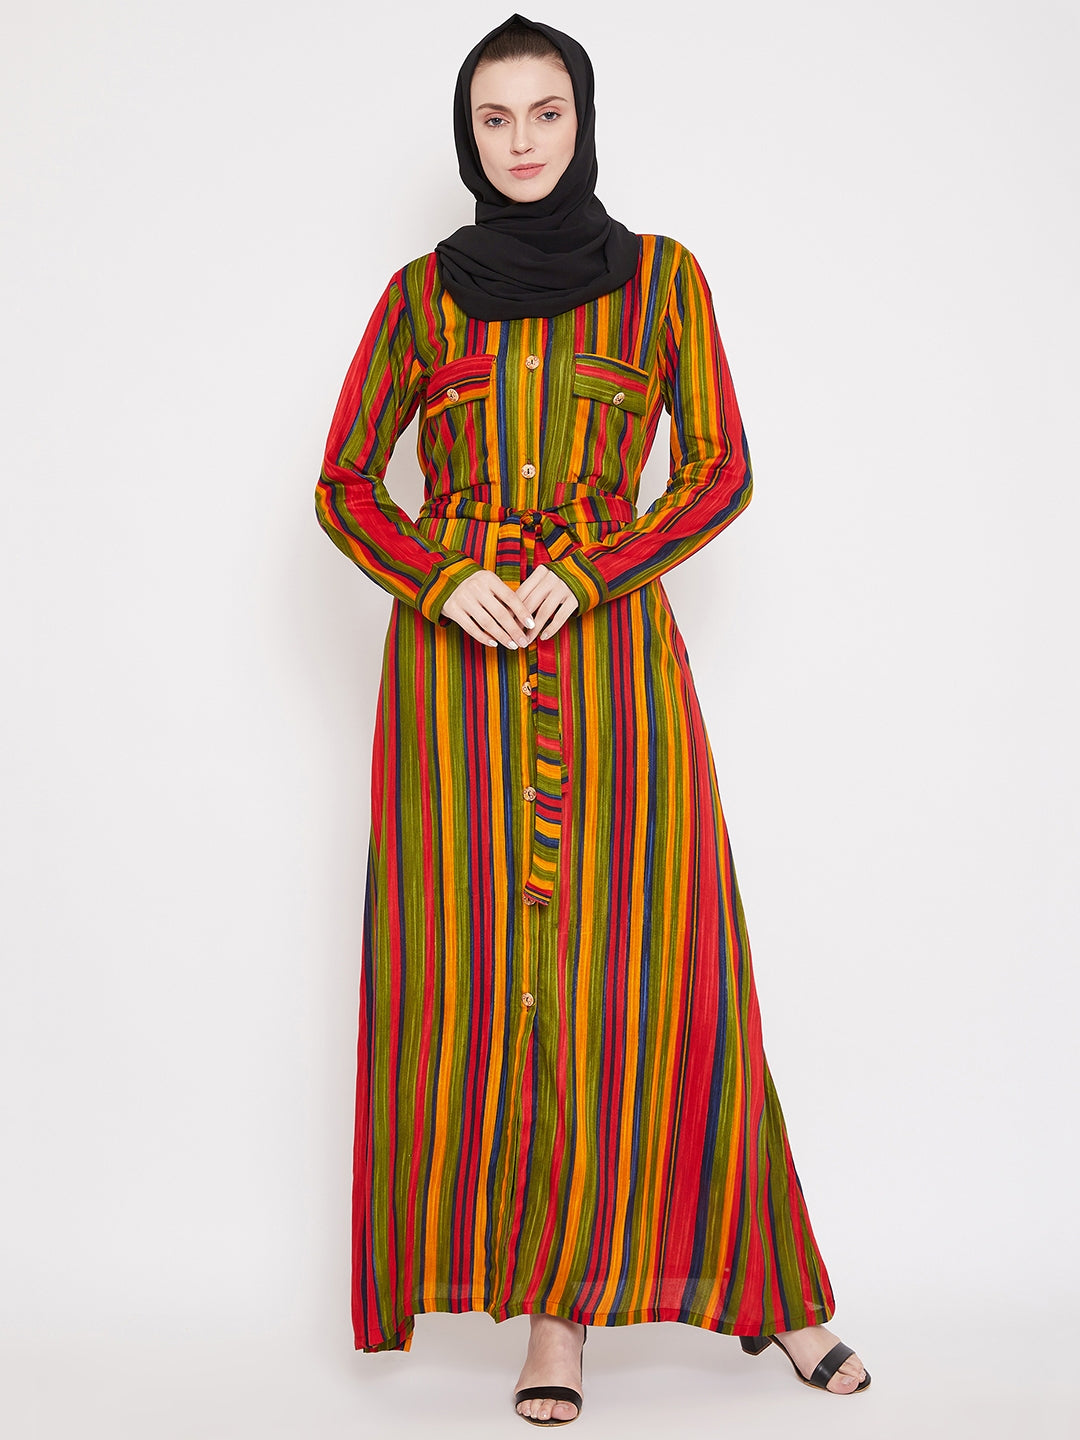 Multi Color Rayon Stripe Front Open Abaya for Women with Black Georgette Scarf